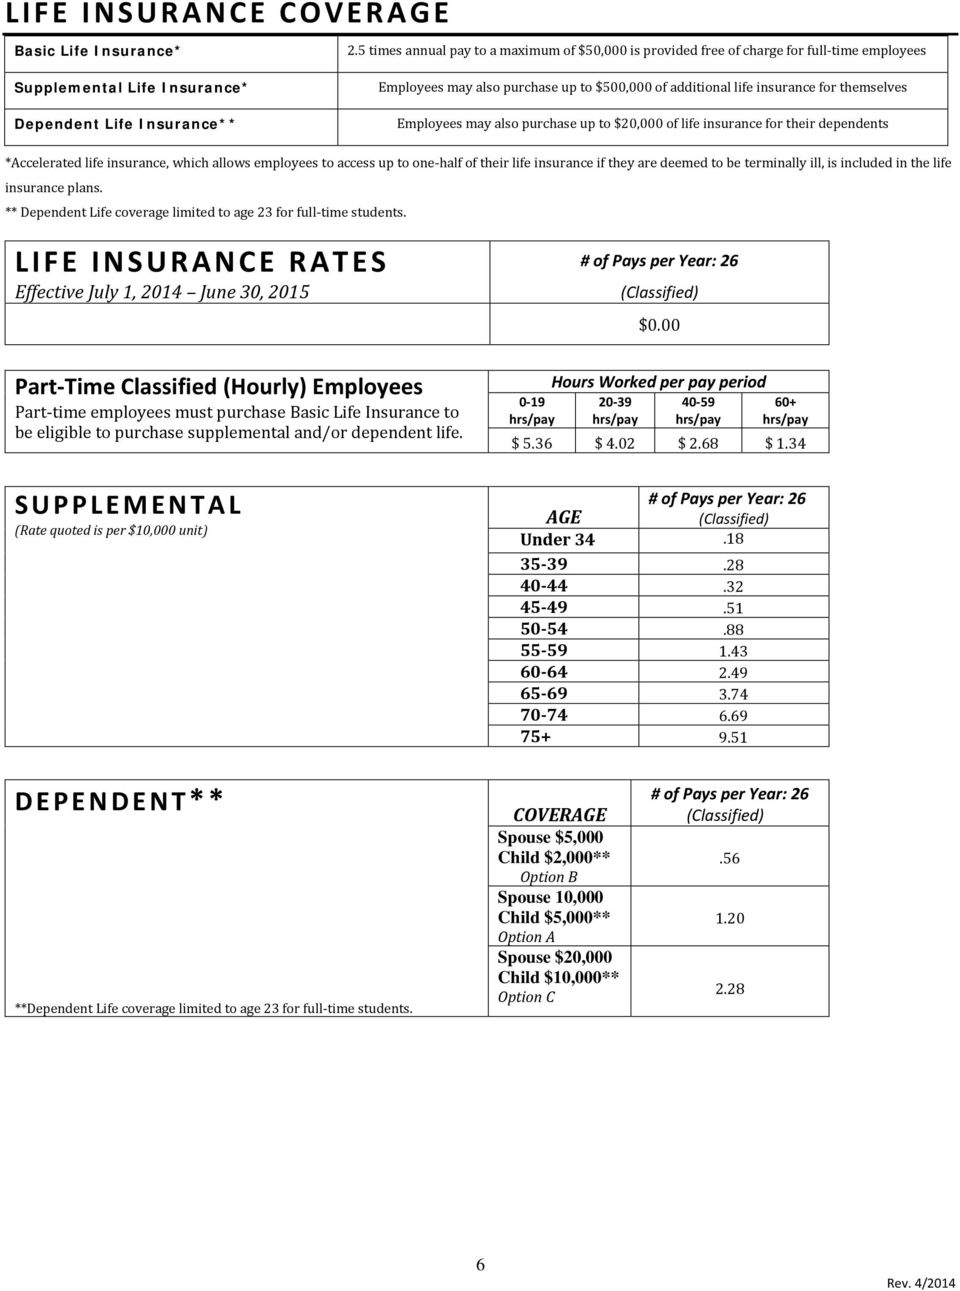 additional life insurance for themselves Employees may also purchase up to $20,000 of life insurance for their dependents *Accelerated life insurance, which allows employees to access up to one half